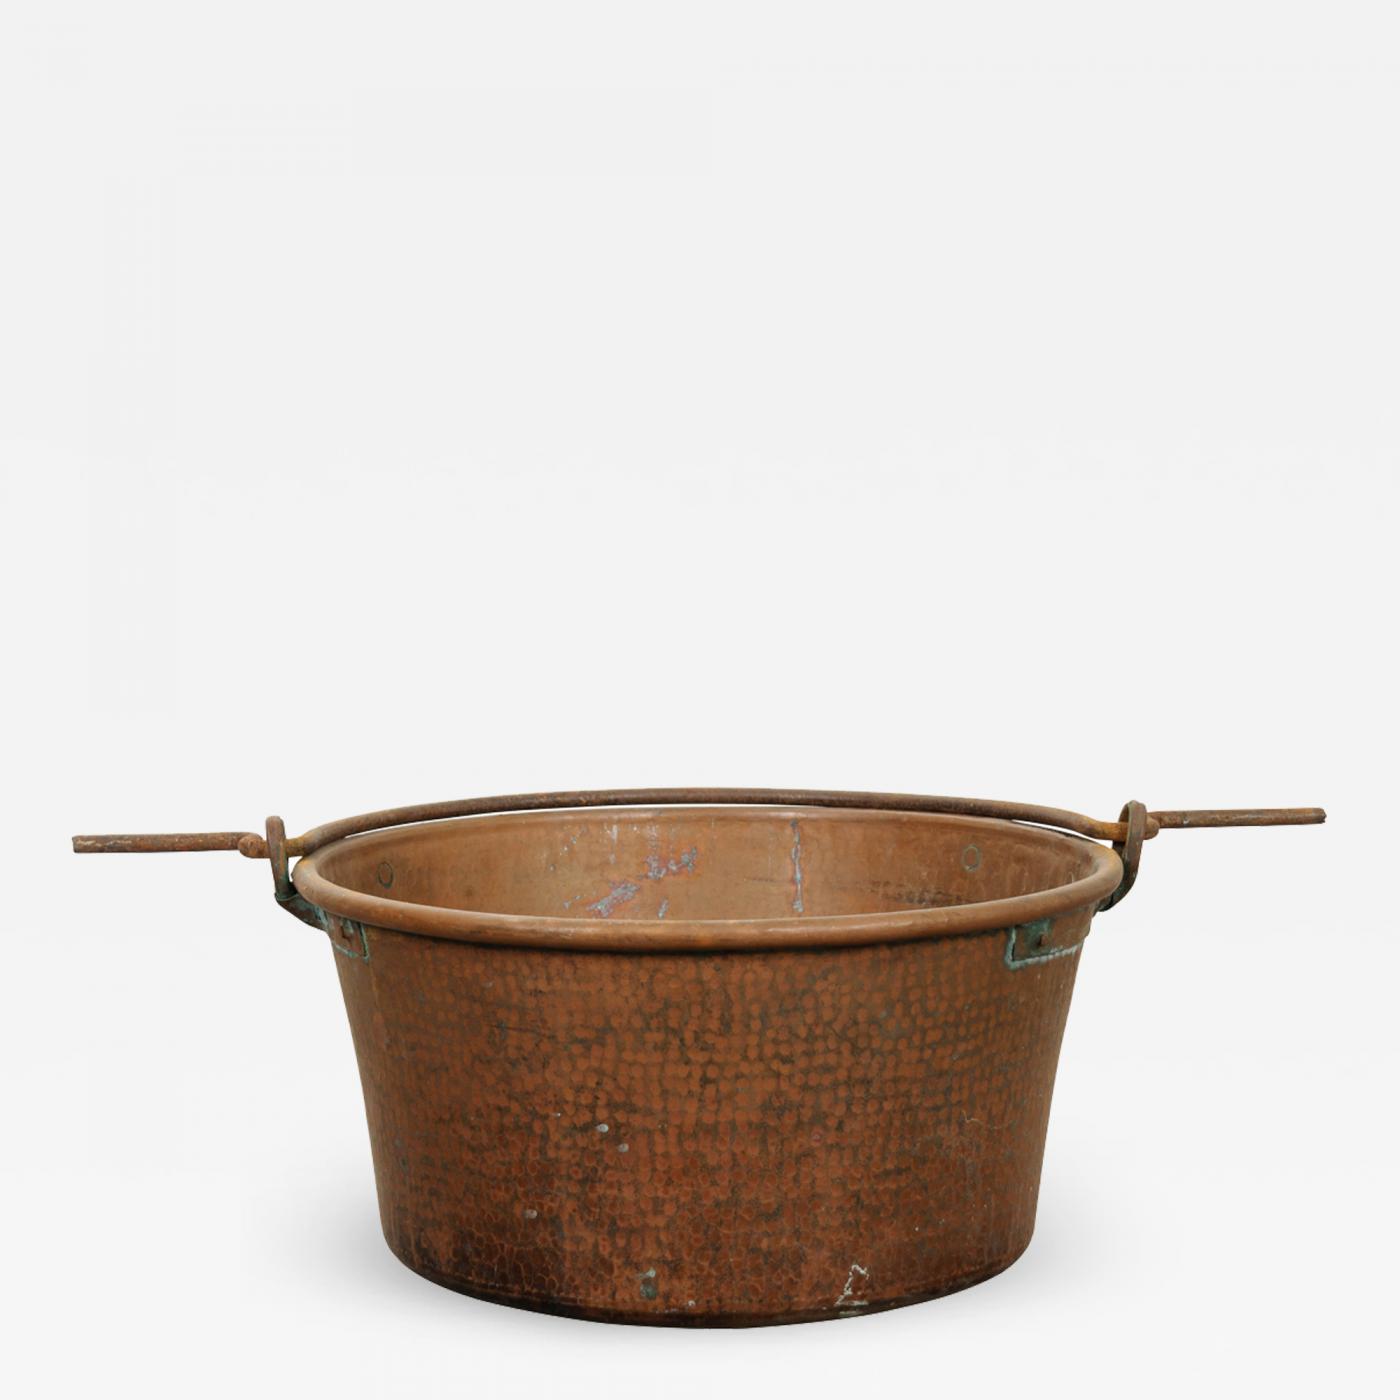 https://cdn.incollect.com/sites/default/files/zoom/Large-French-Copper-Pot-with-Iron-Hanging-Handle-393356-1549215.jpg